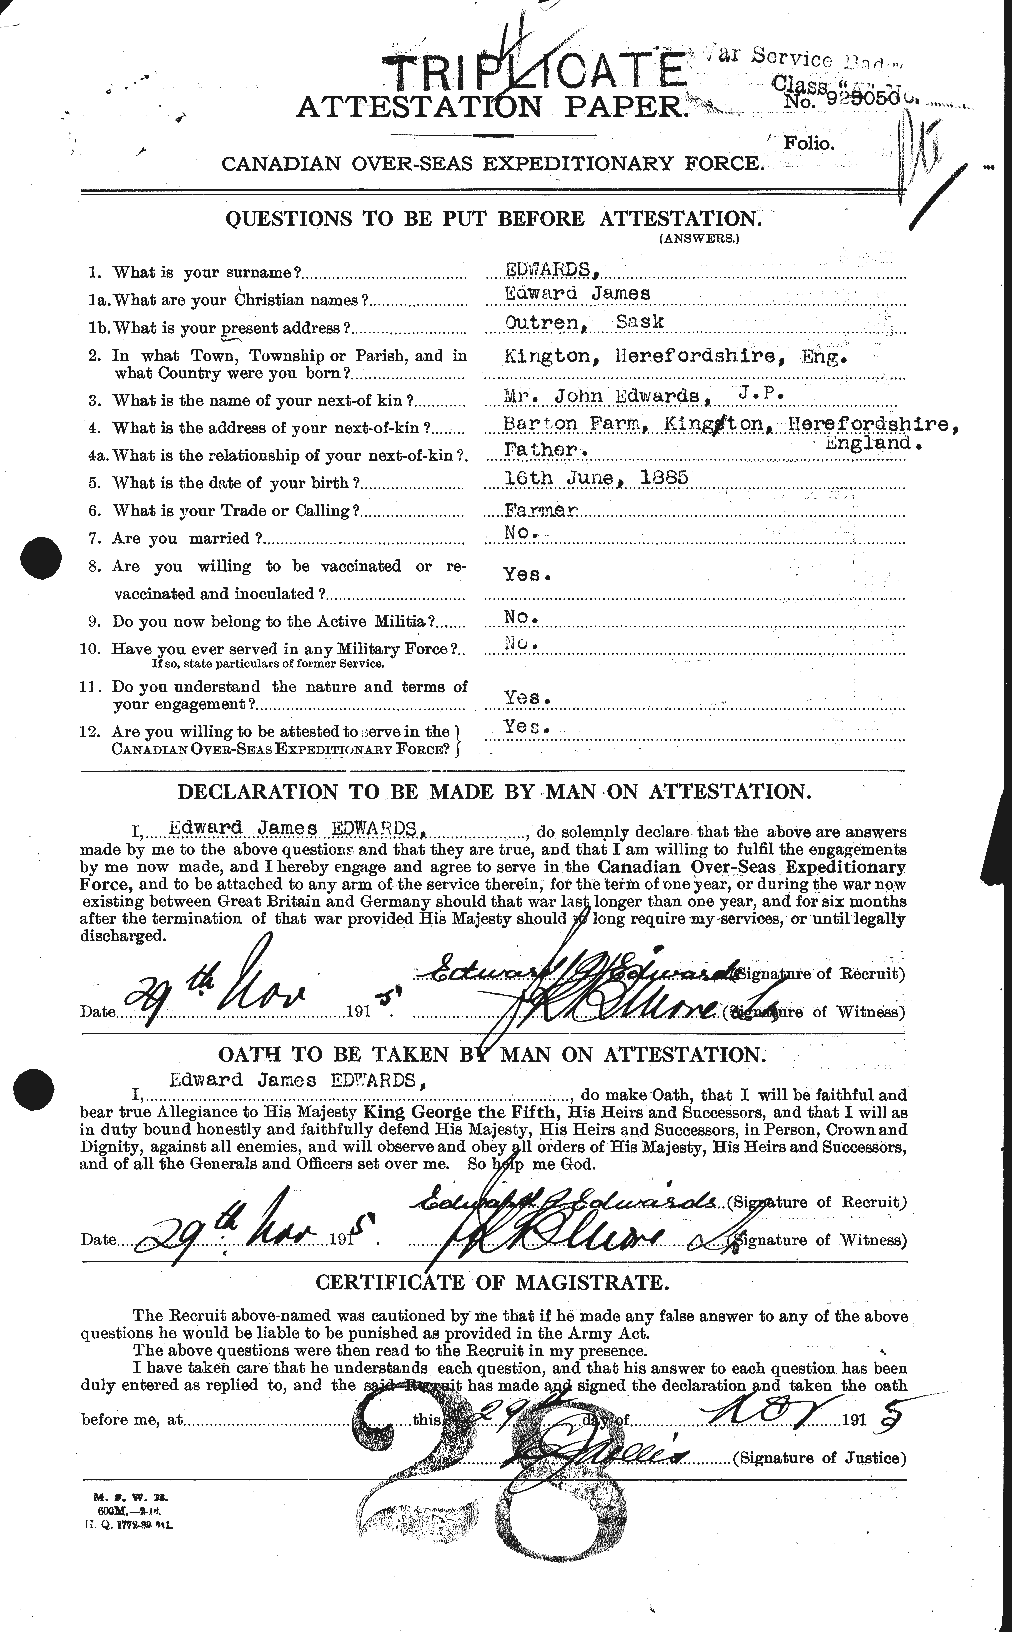 Personnel Records of the First World War - CEF 307905a